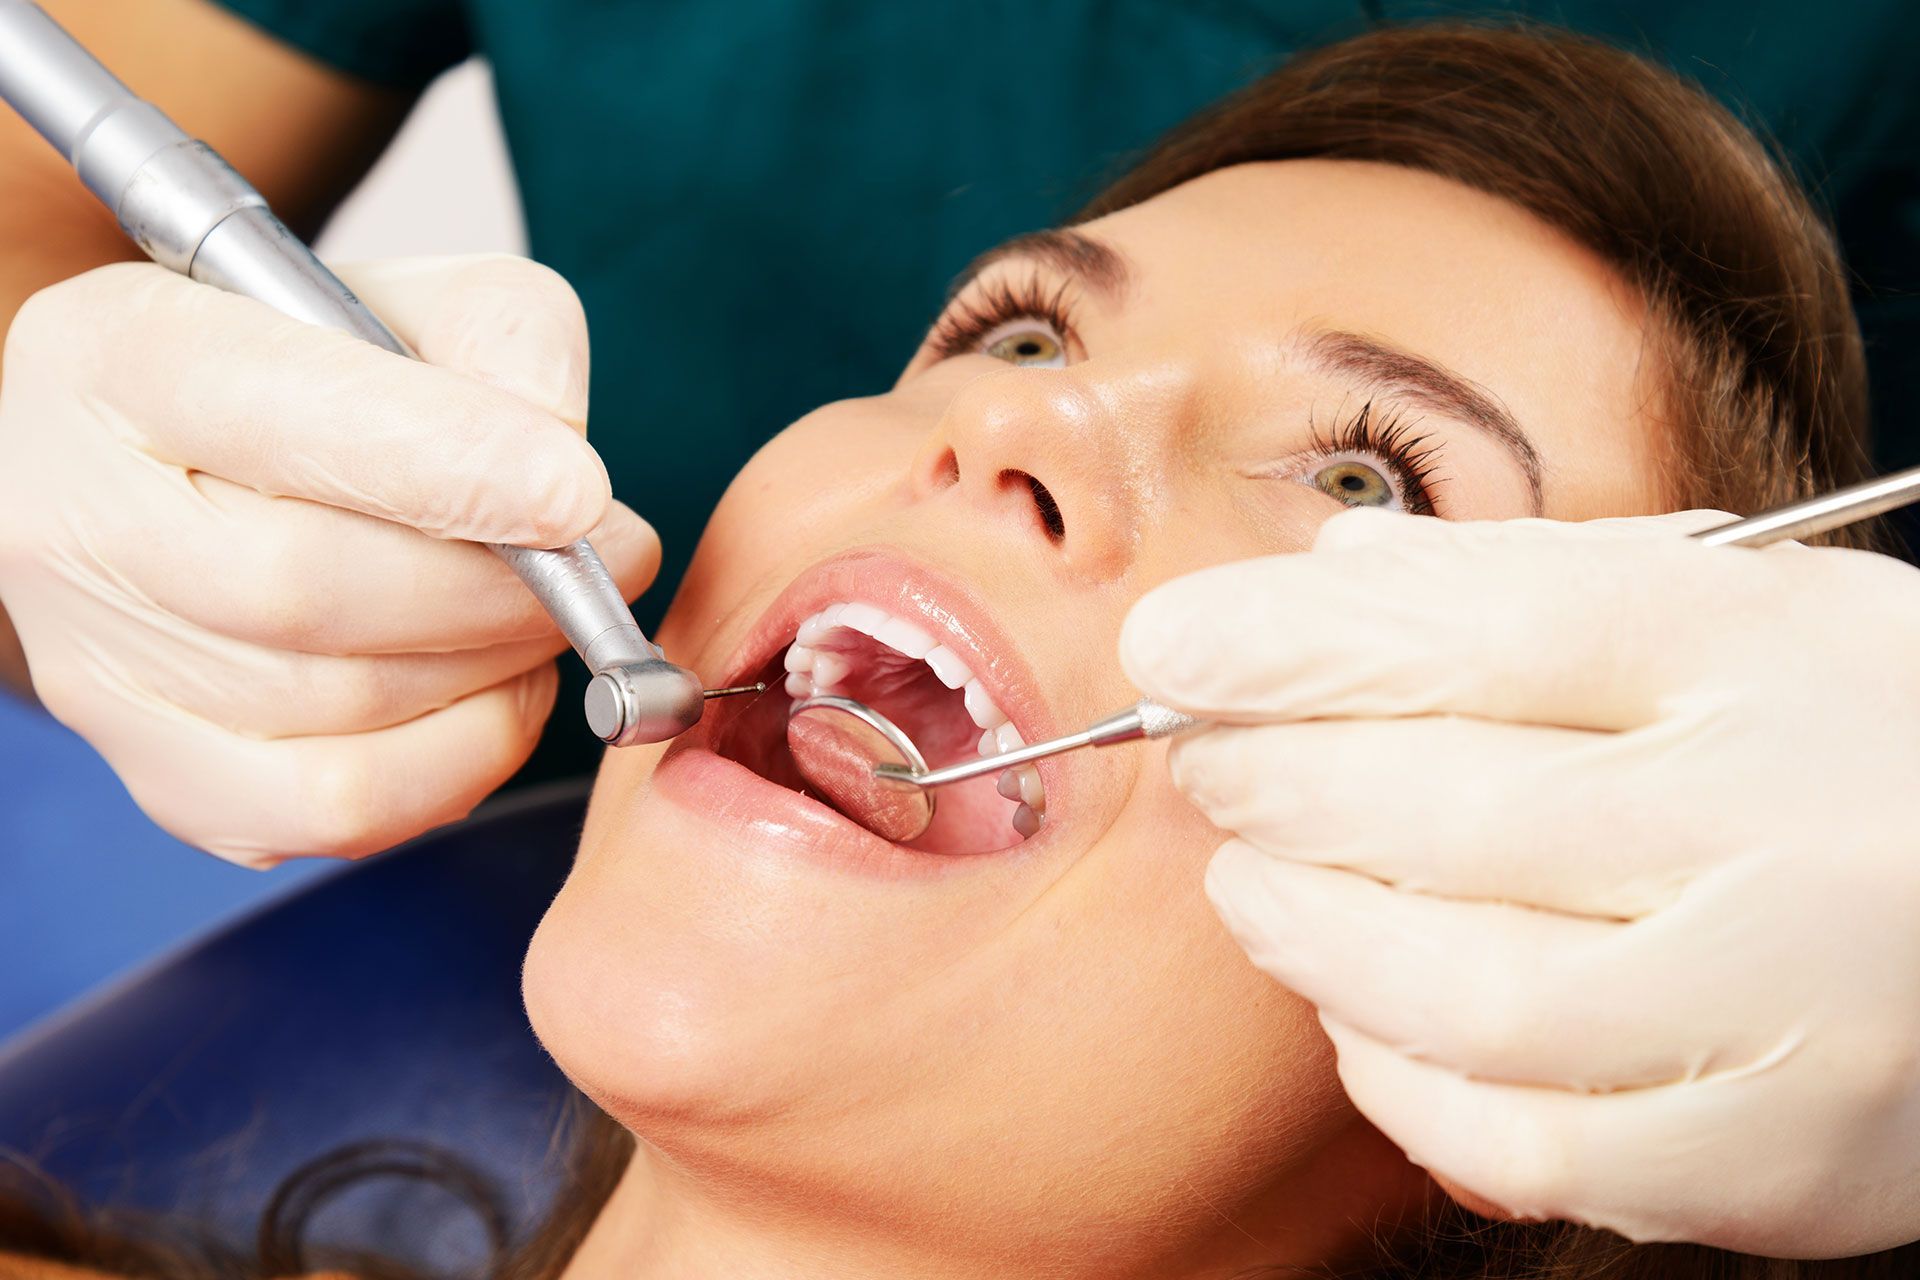 What is the Lifespan of a Root Canal